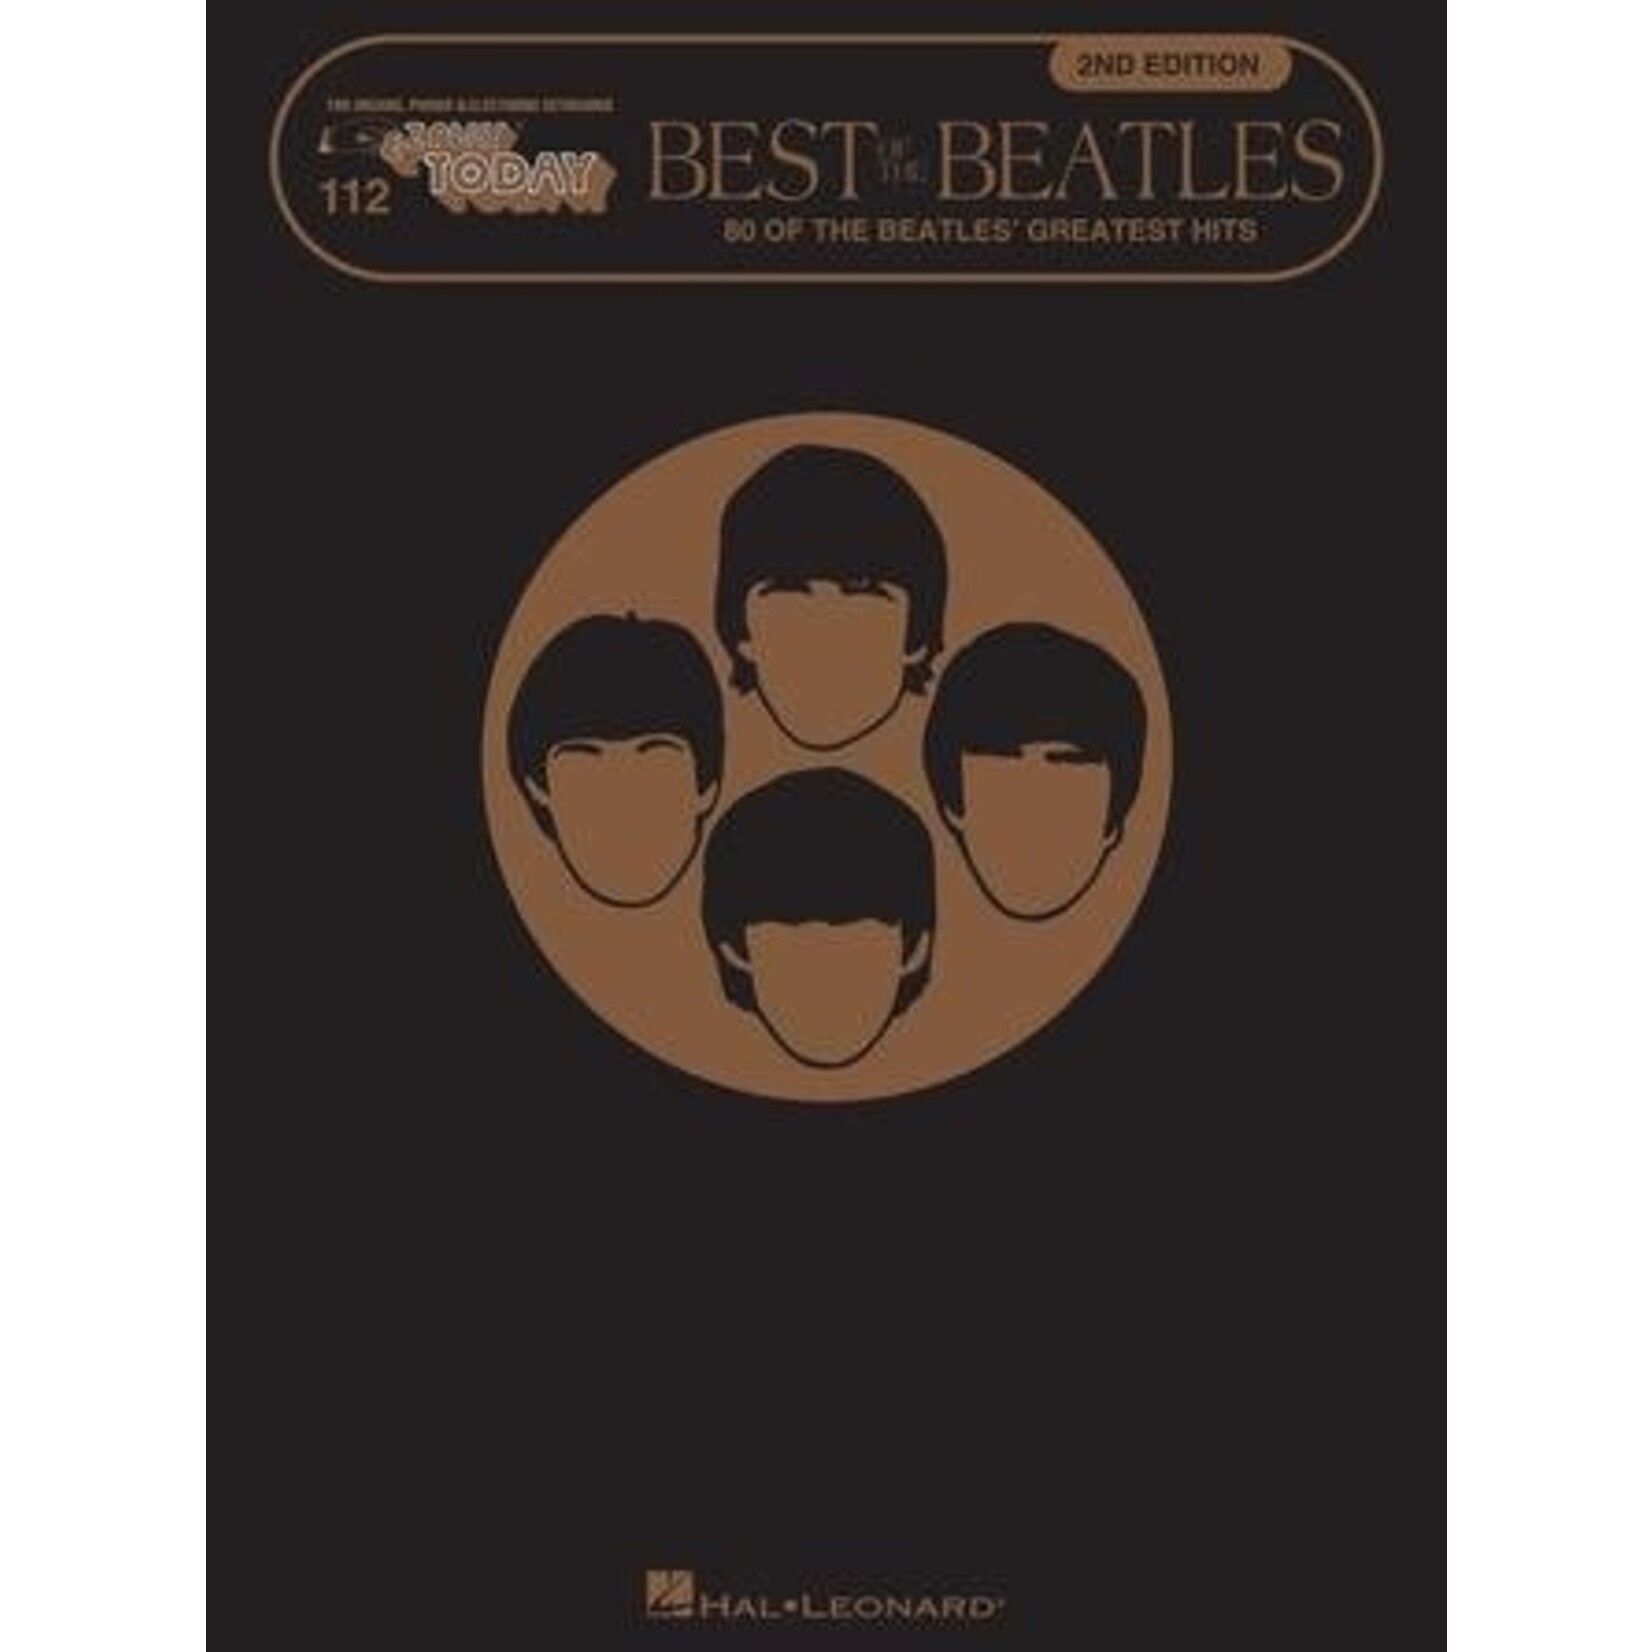 Hal Leonard Best Of The Beatles E-Z Play Today Volume 112